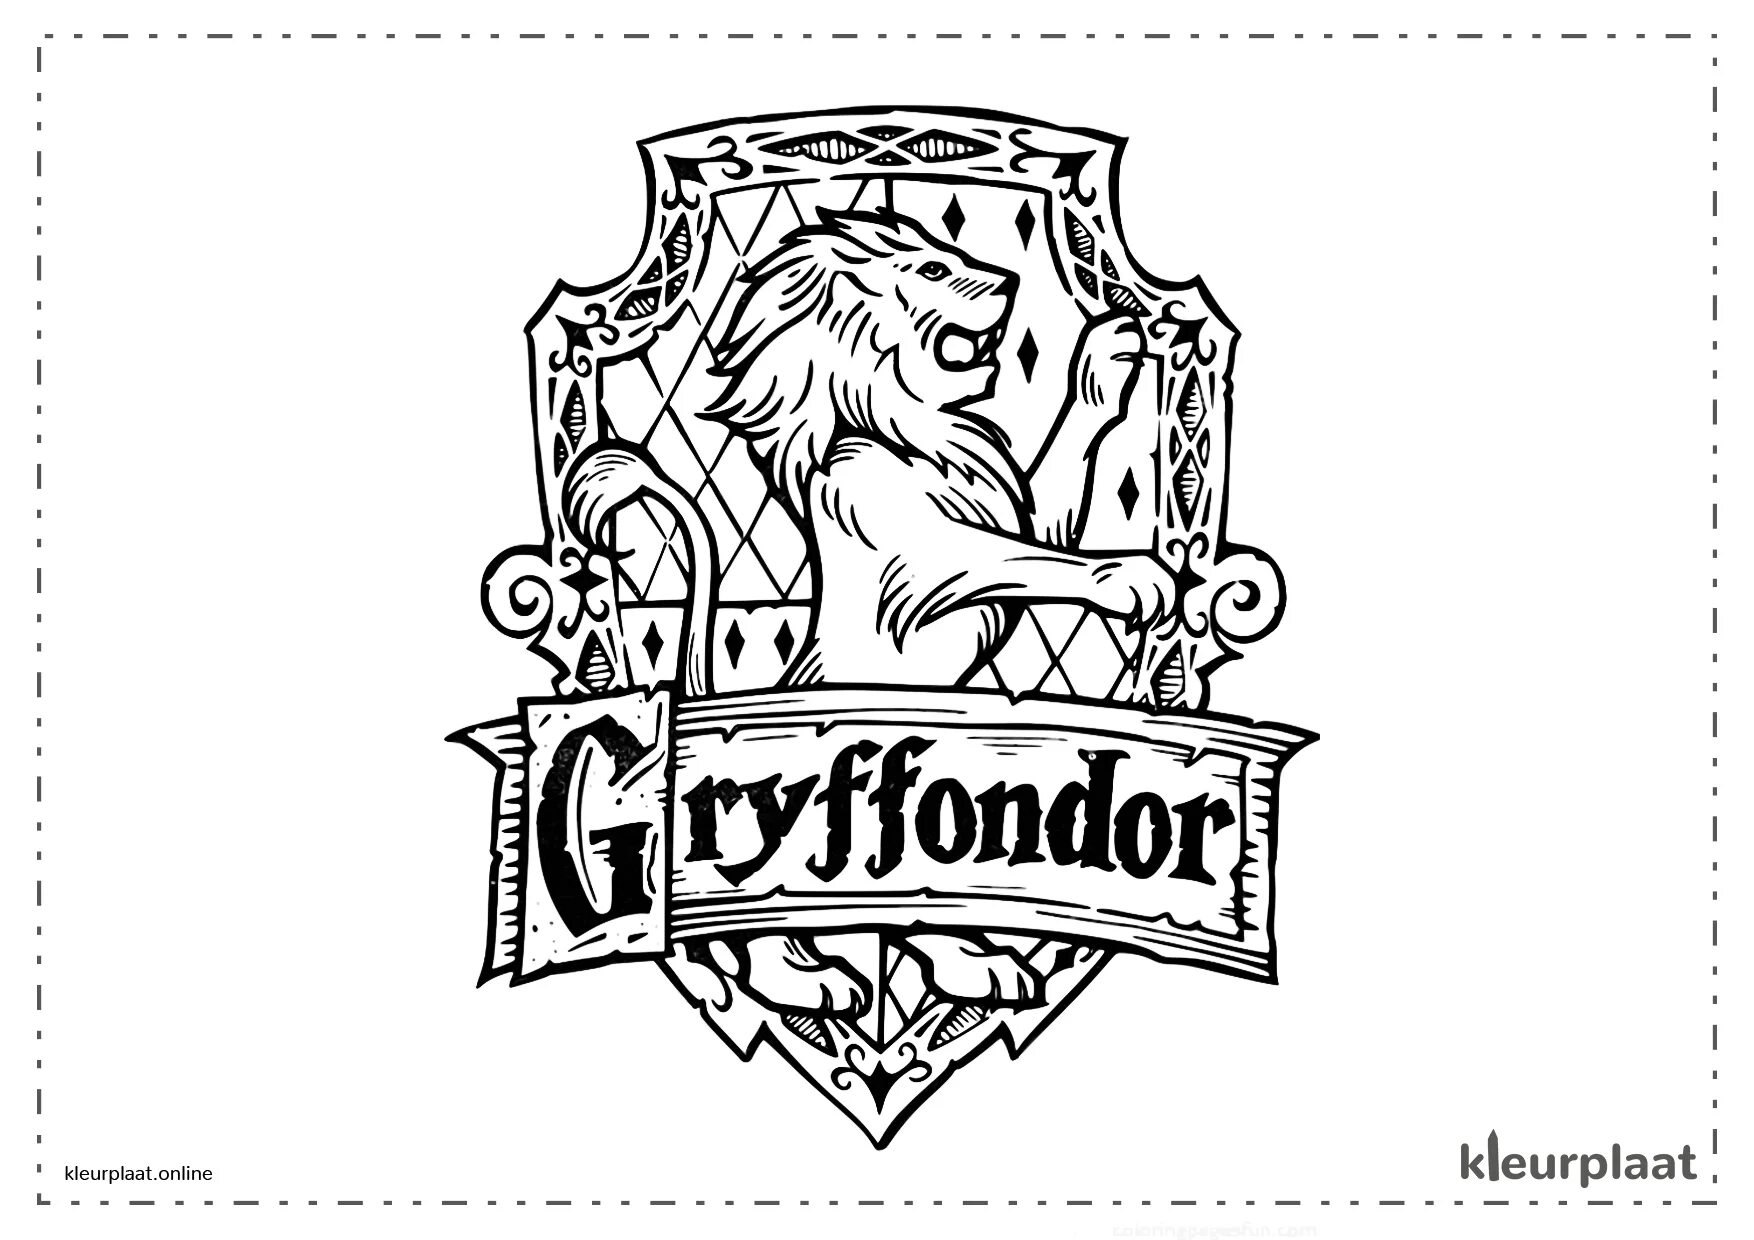 Harry Potter School of Witchcraft and Wizardry coloring book for fans